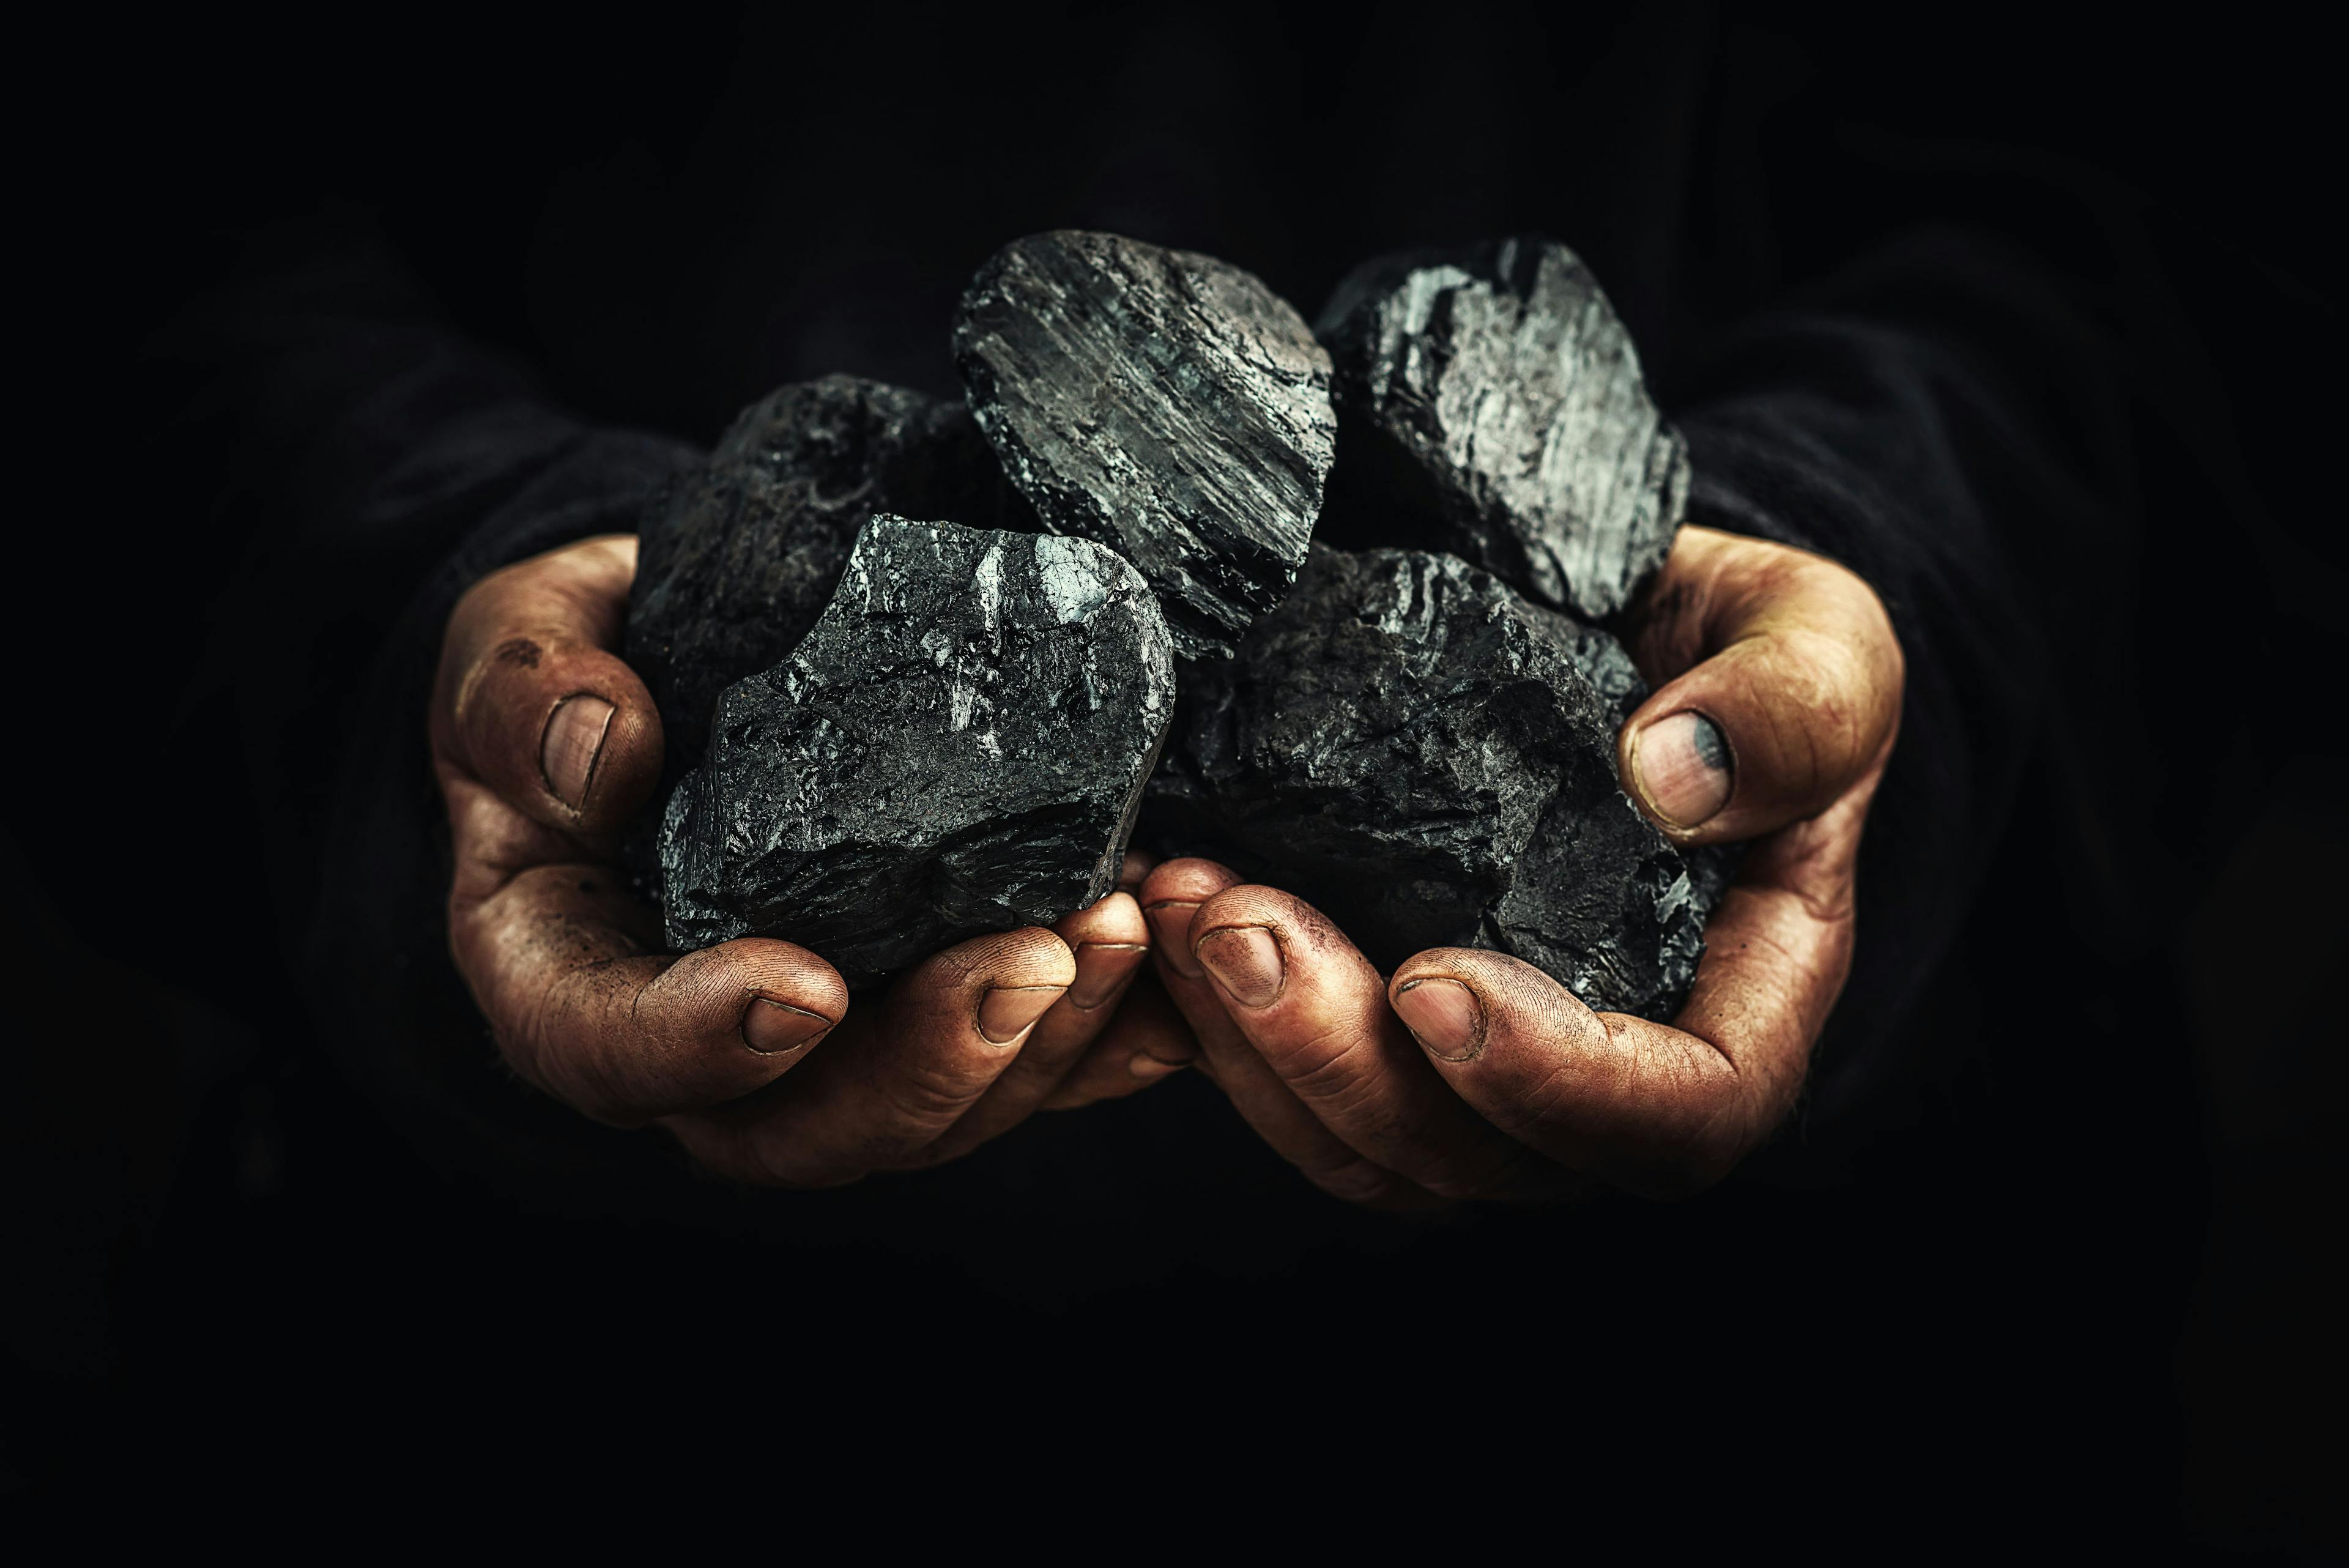 black coal in the hands, heavy industry, heating, mineral raw materials | Image Credit: © martingaal - stock.adobe.com